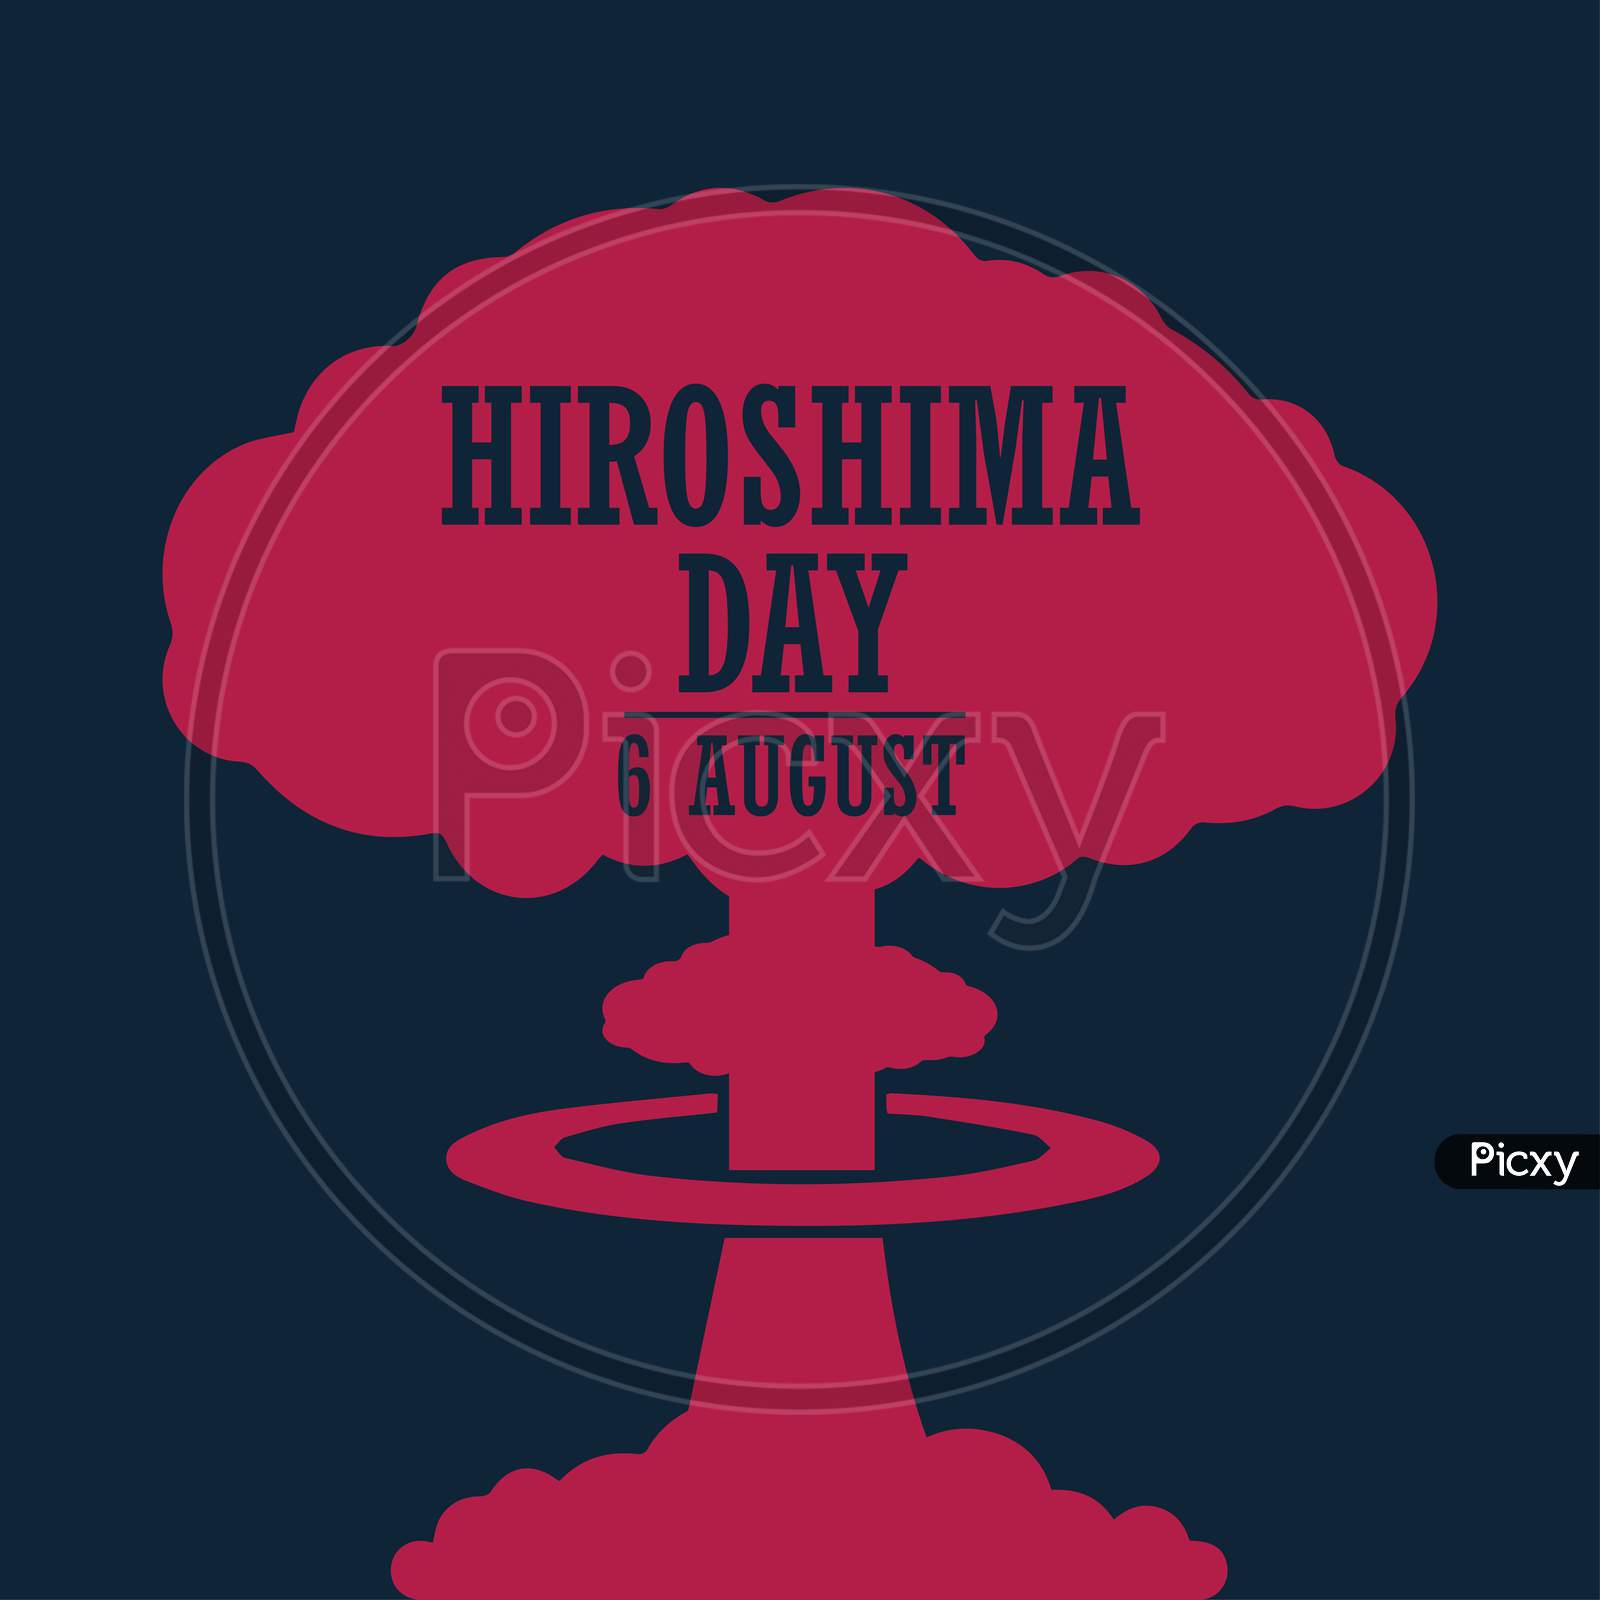 Hiroshima Day, 6 August, Red Colored Nuclear Bomb Explosion Poster, Illustration Vector